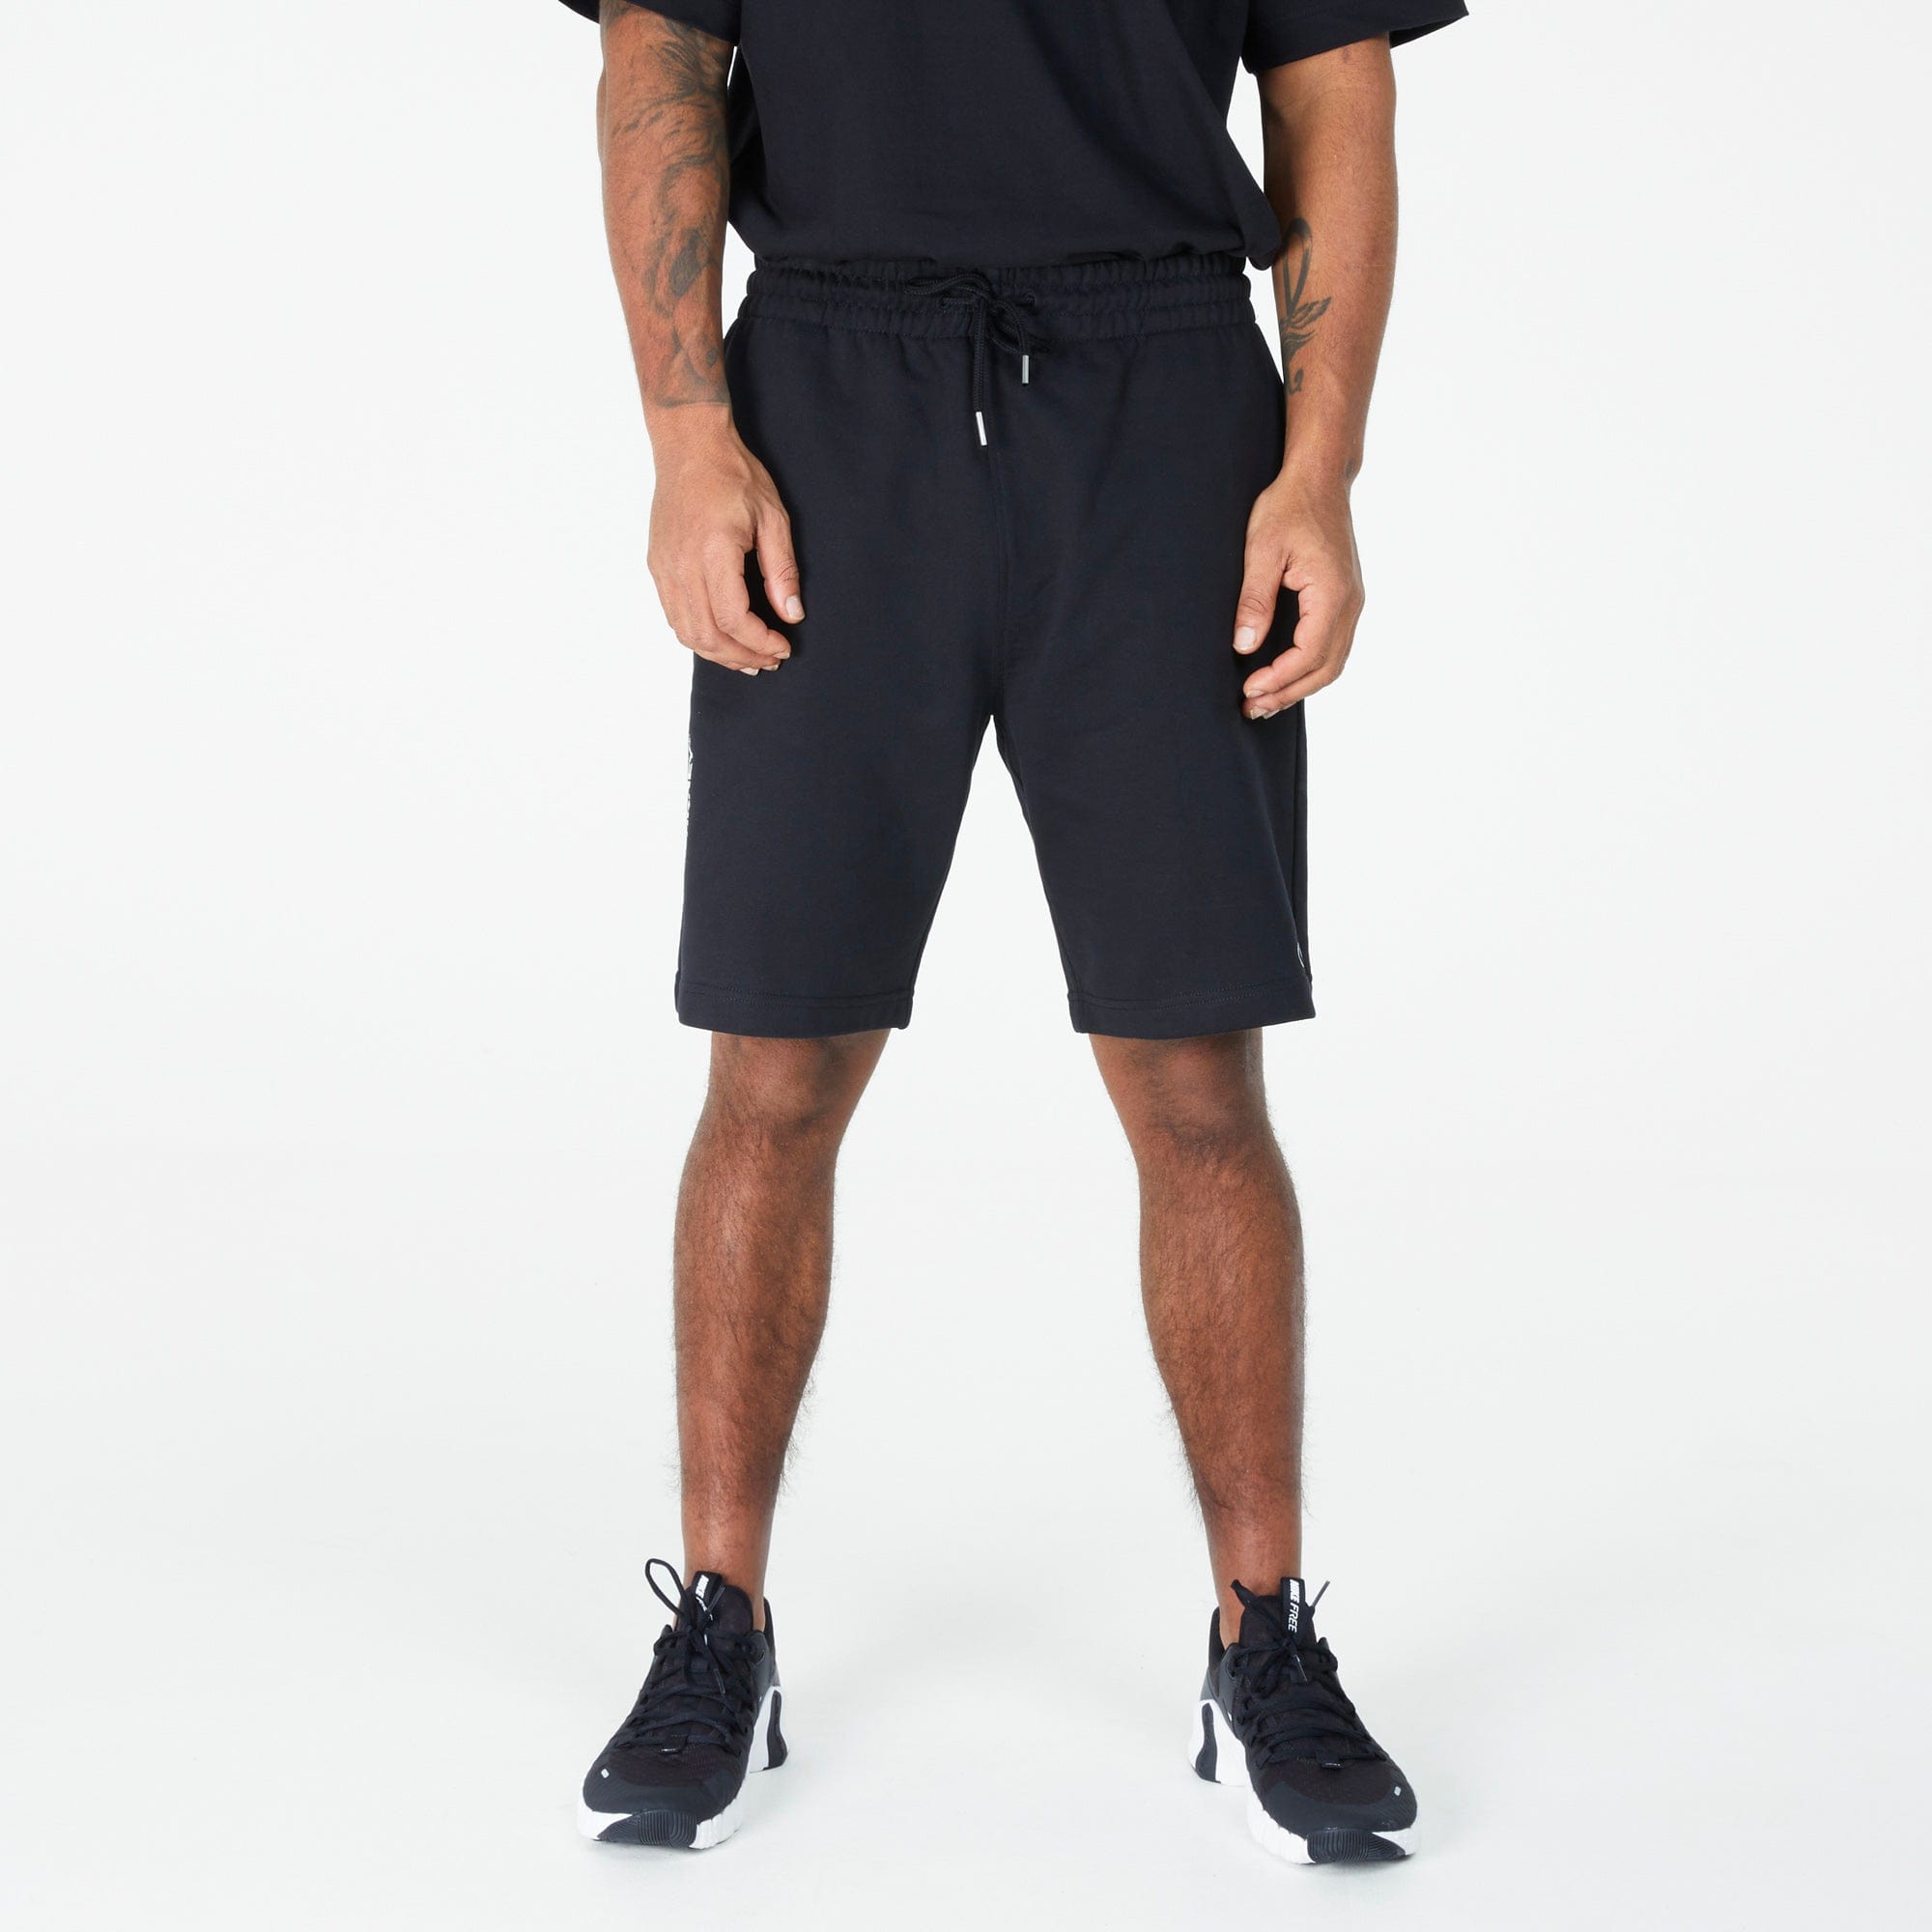 WIT Fitness Tracksuits WIT Transformation Jogger Short in Black and Bone